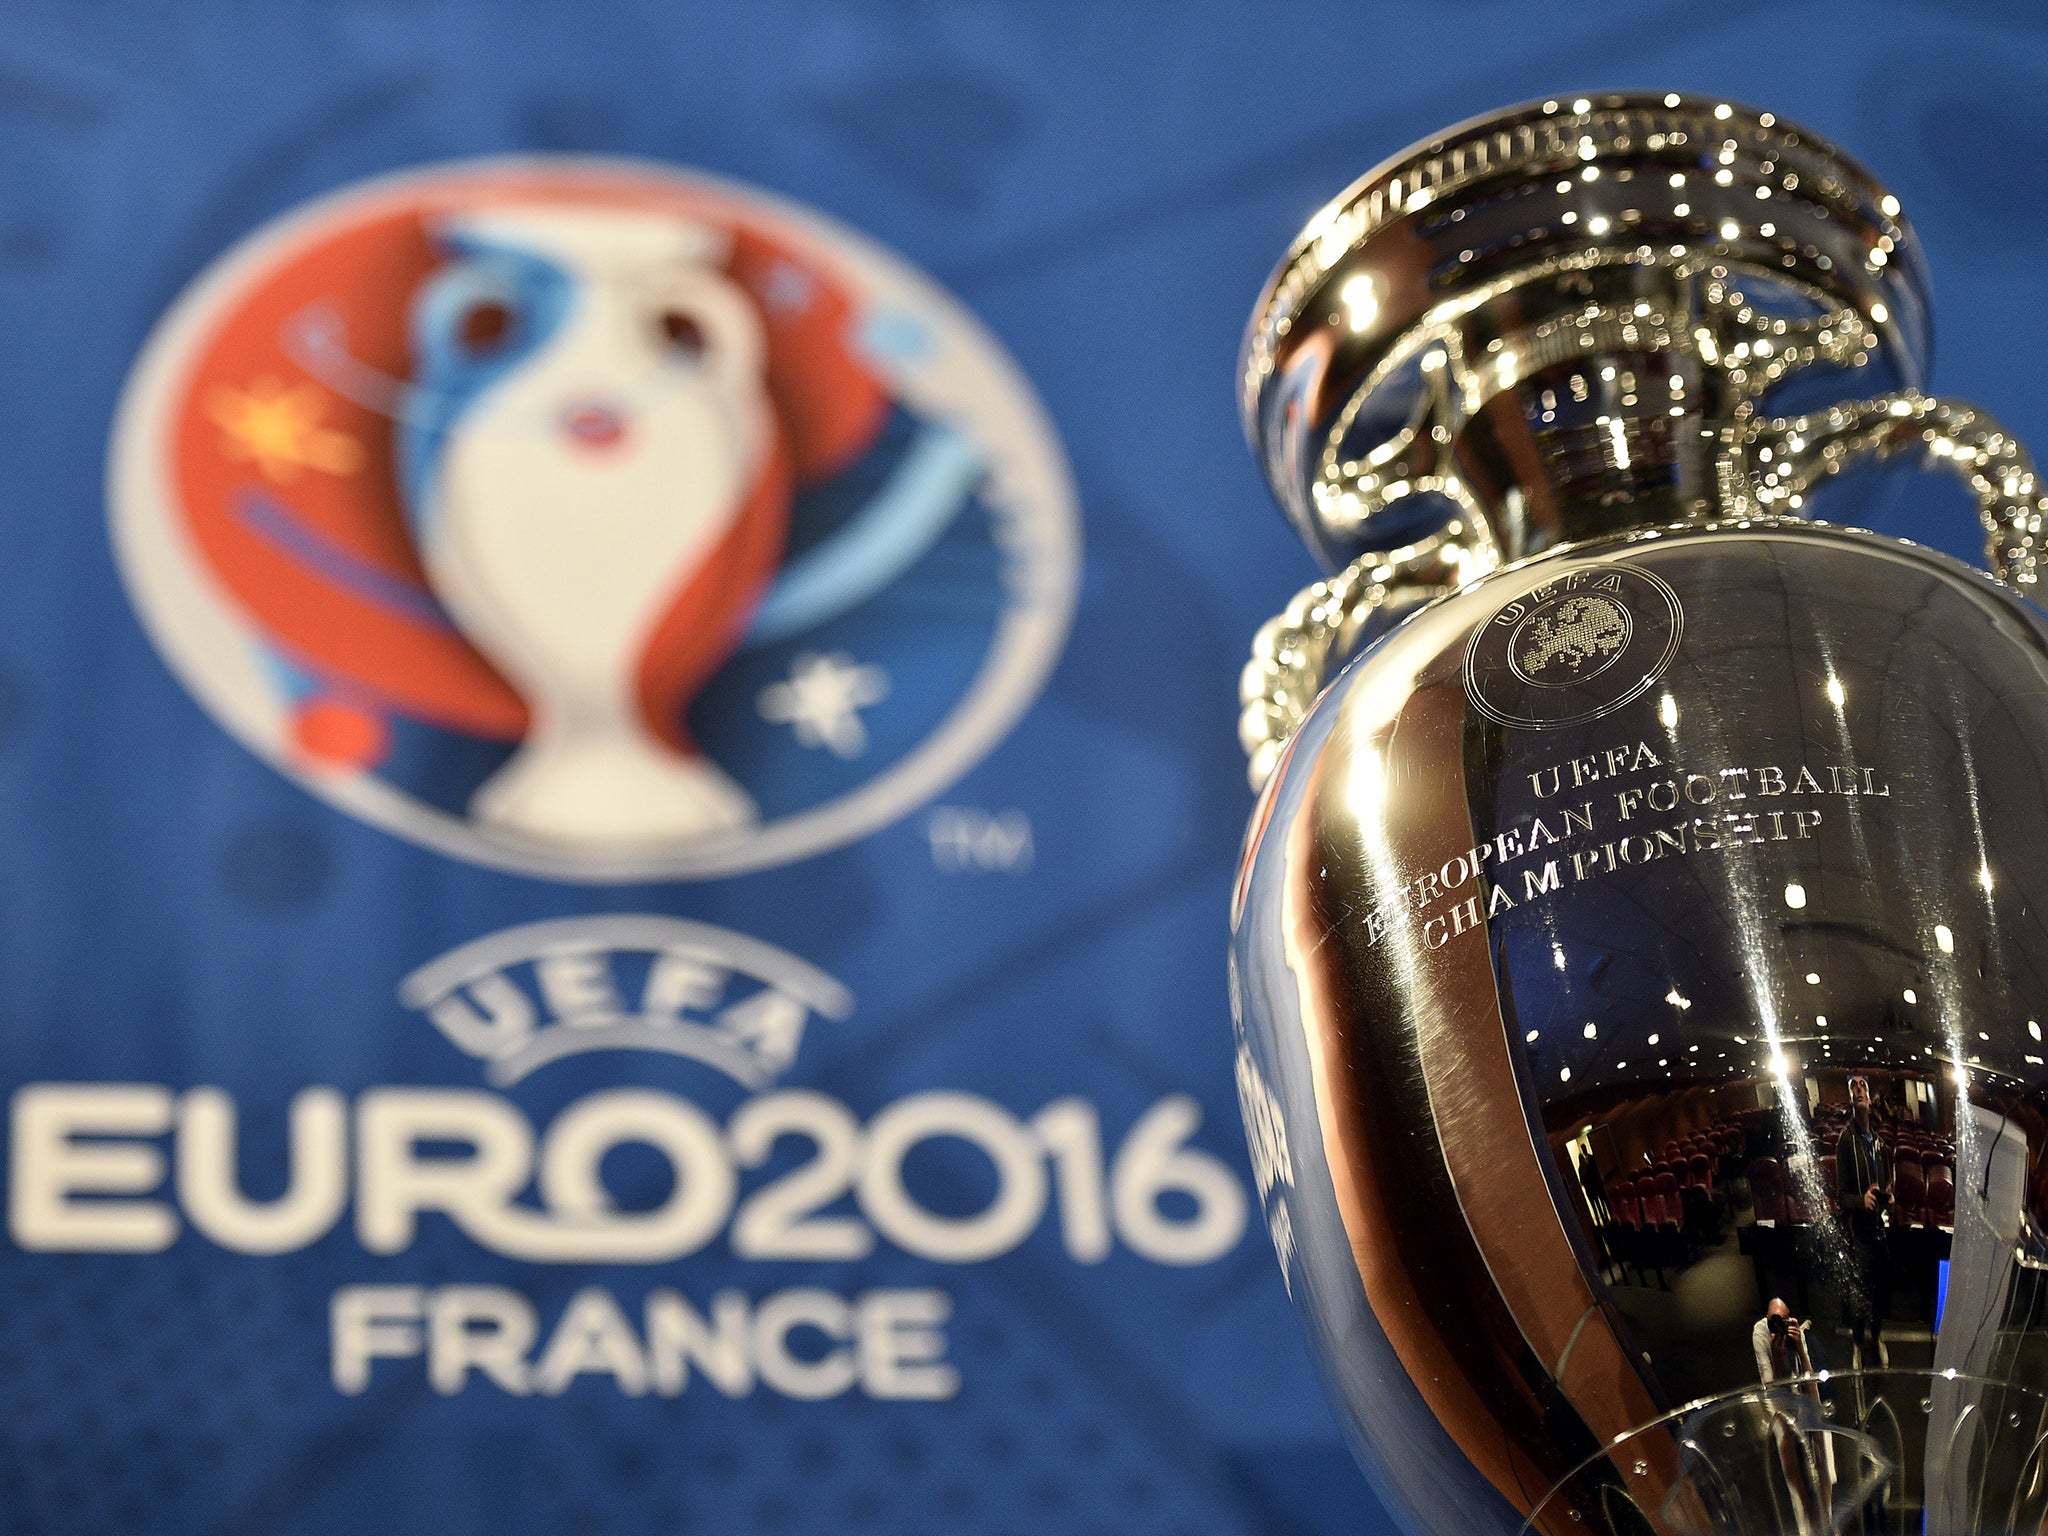 Euro 2016 is Europe's biggest sporting event